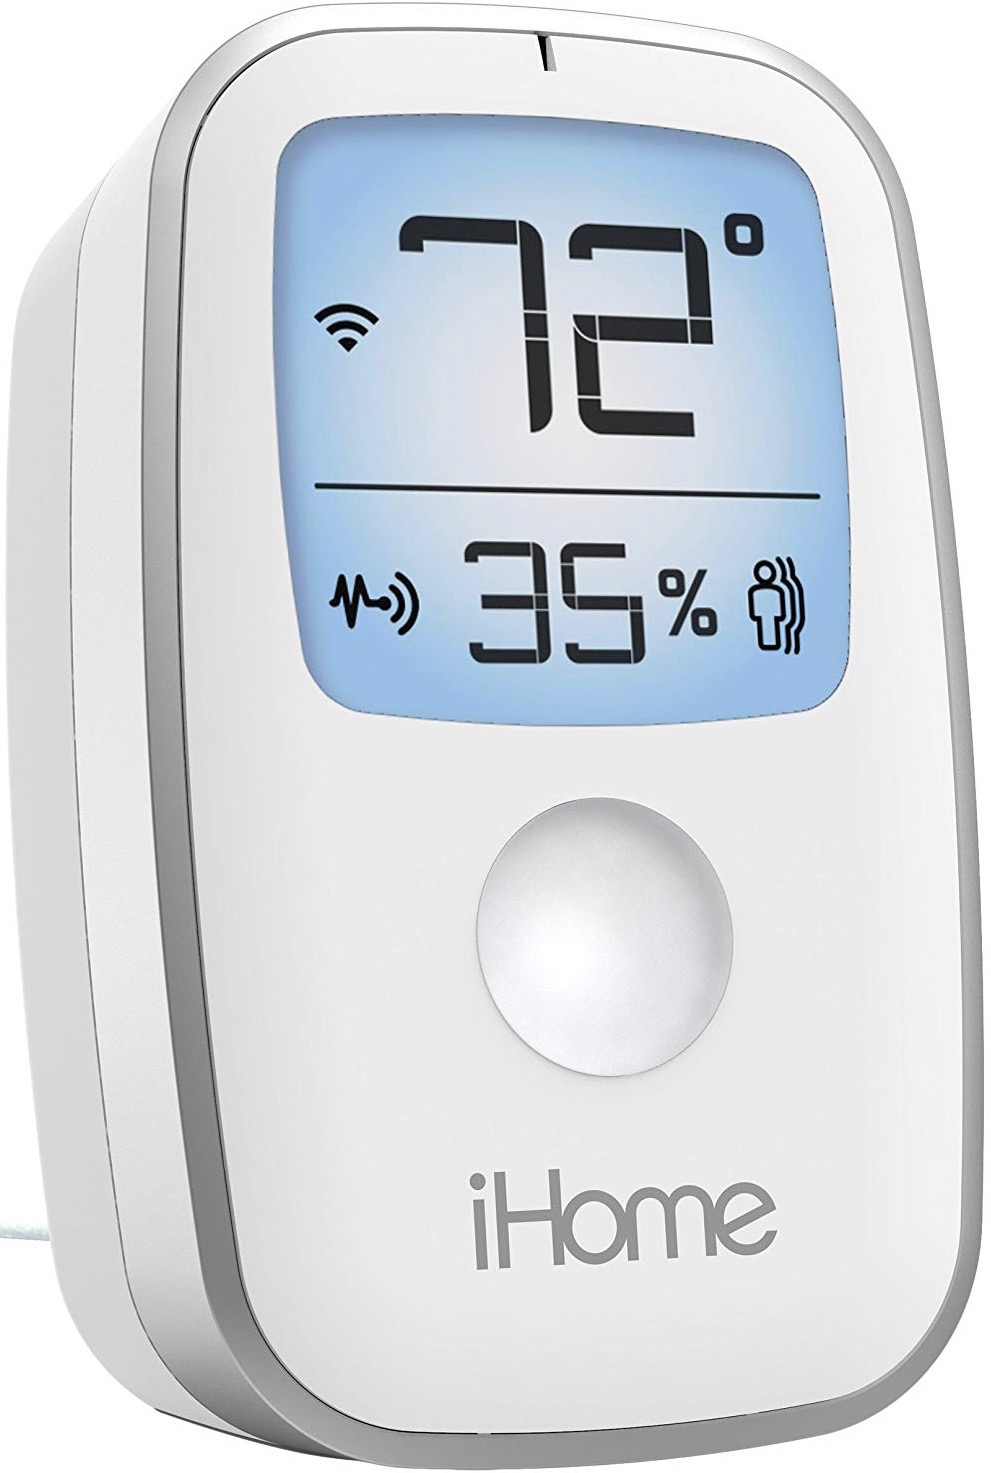 ihome smart home monitor cropped